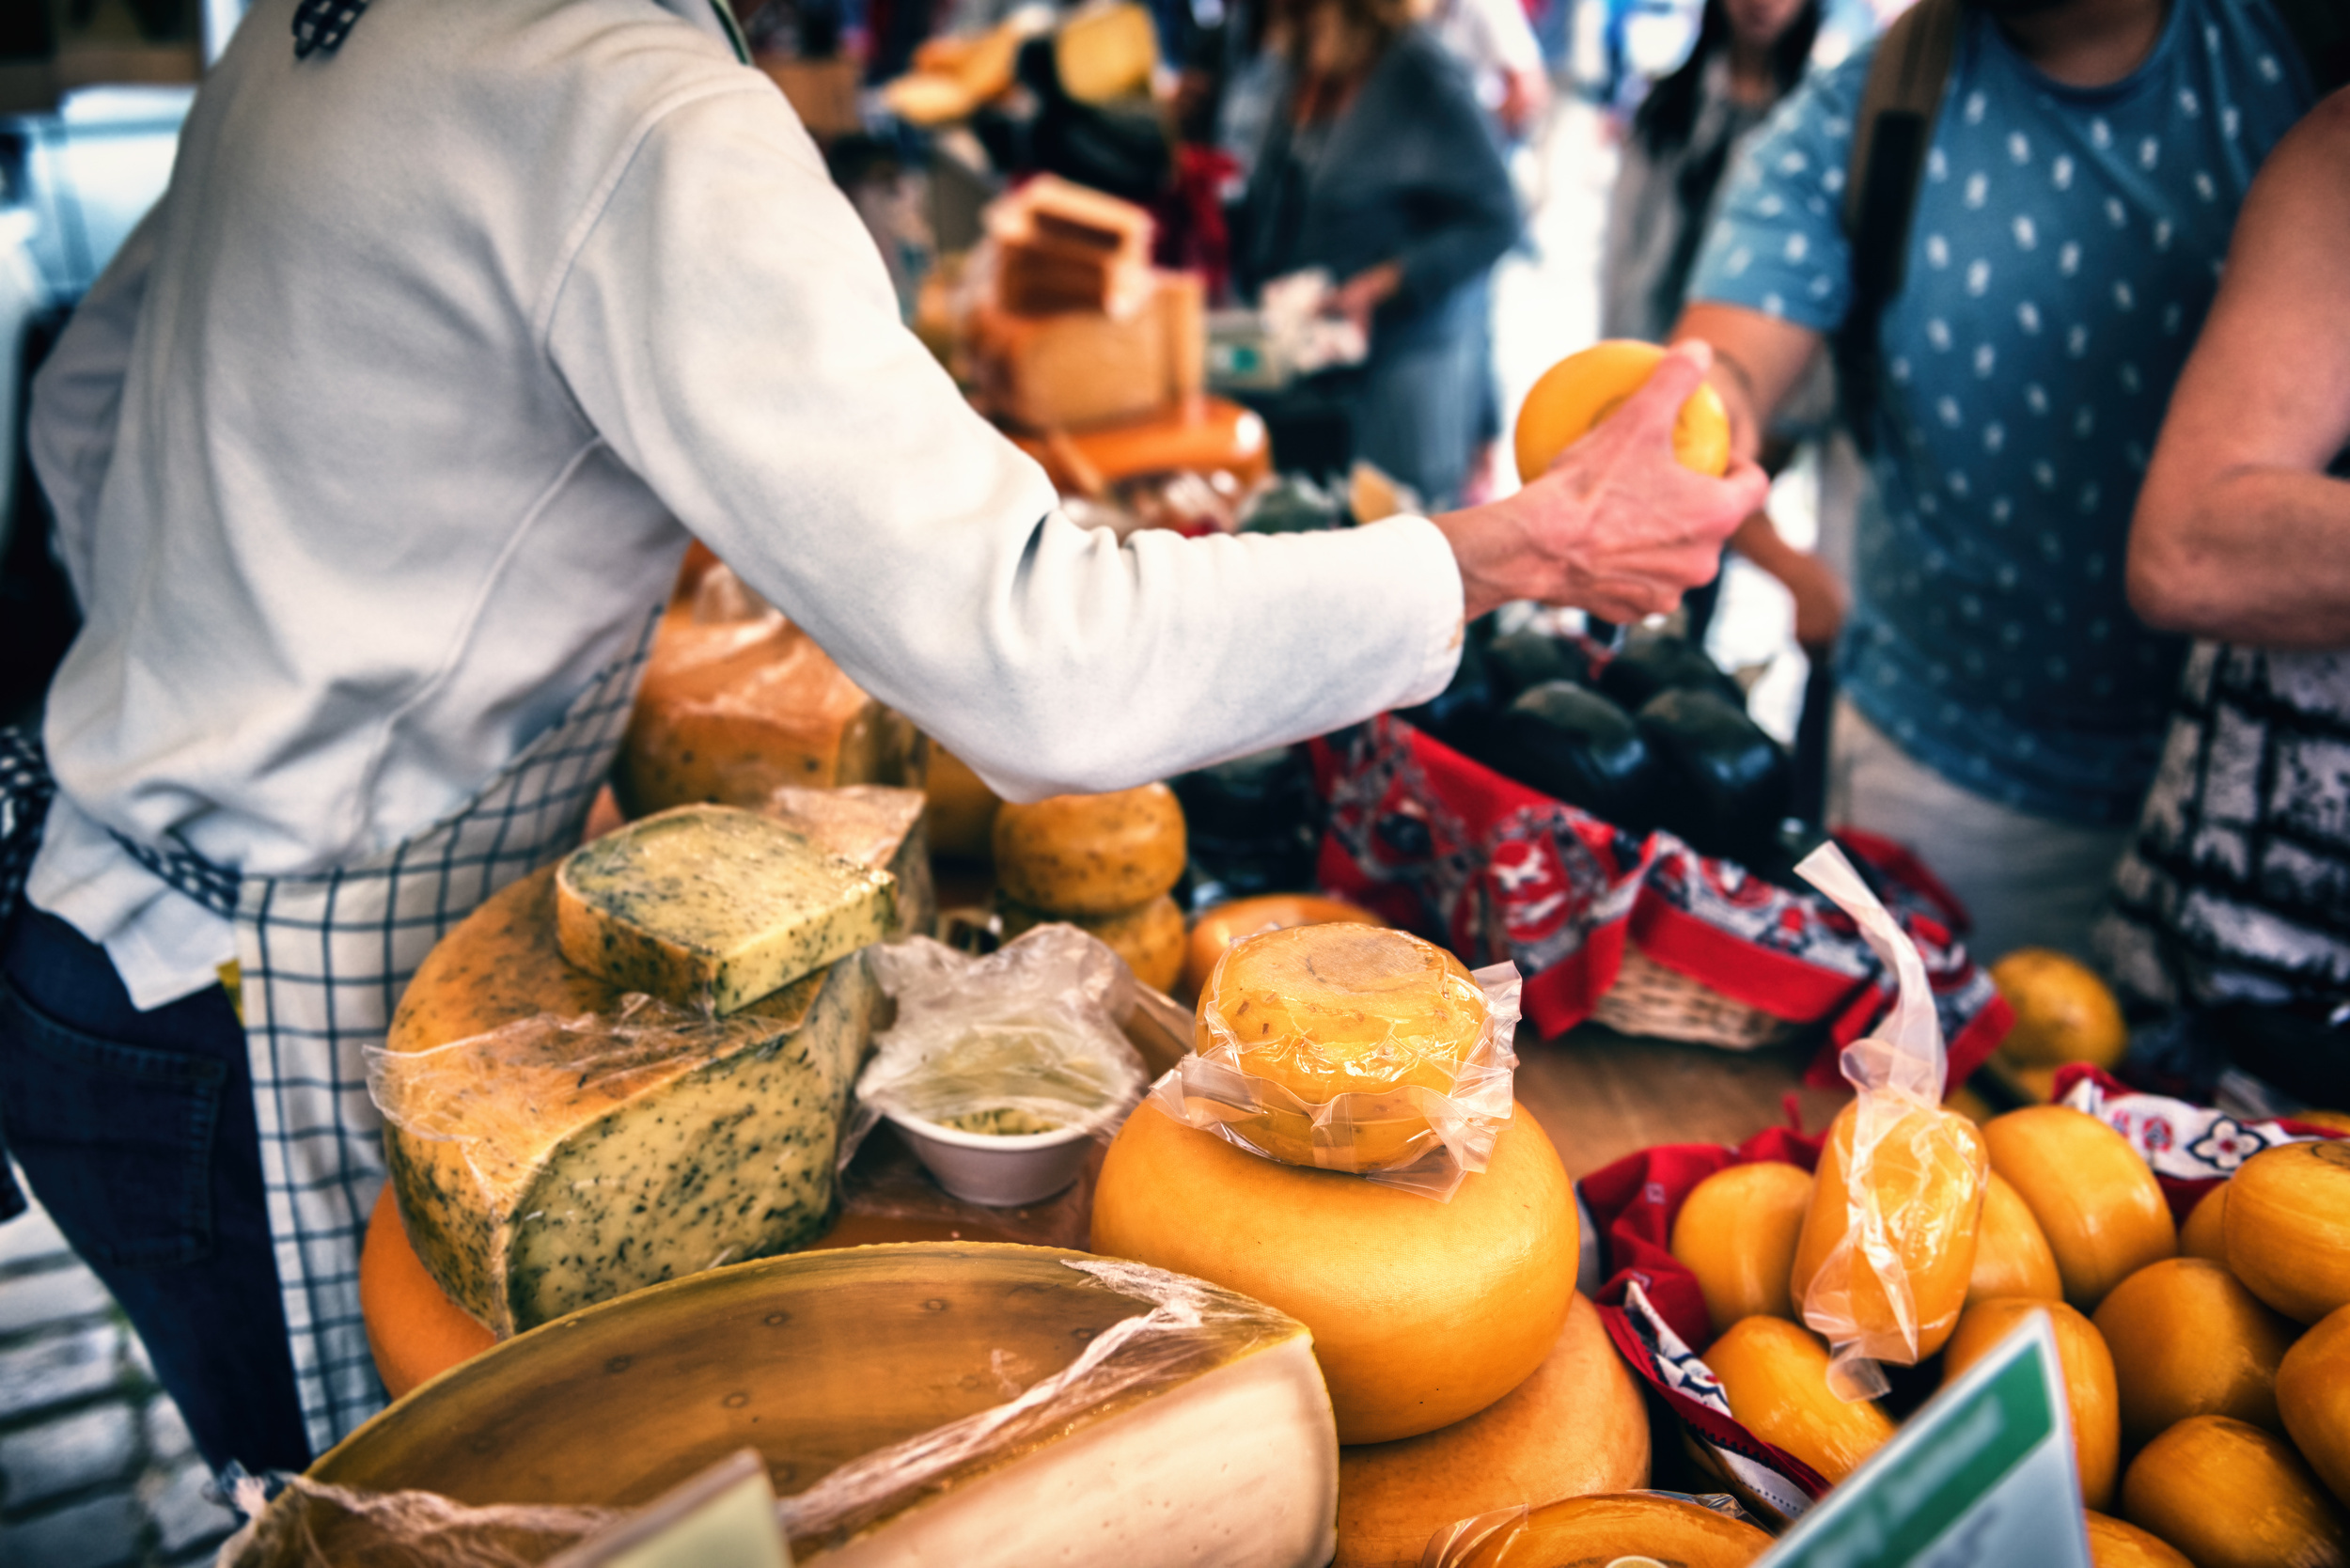 <p>Europe is known to have some fantastic locations for foodies and produces some of the top cheese in the world. So, if you’re a dairy lover, be sure to check out the 21 cheese destinations below. You might recognize many of these names as cheese is often named for the city or region they originate in! </p>